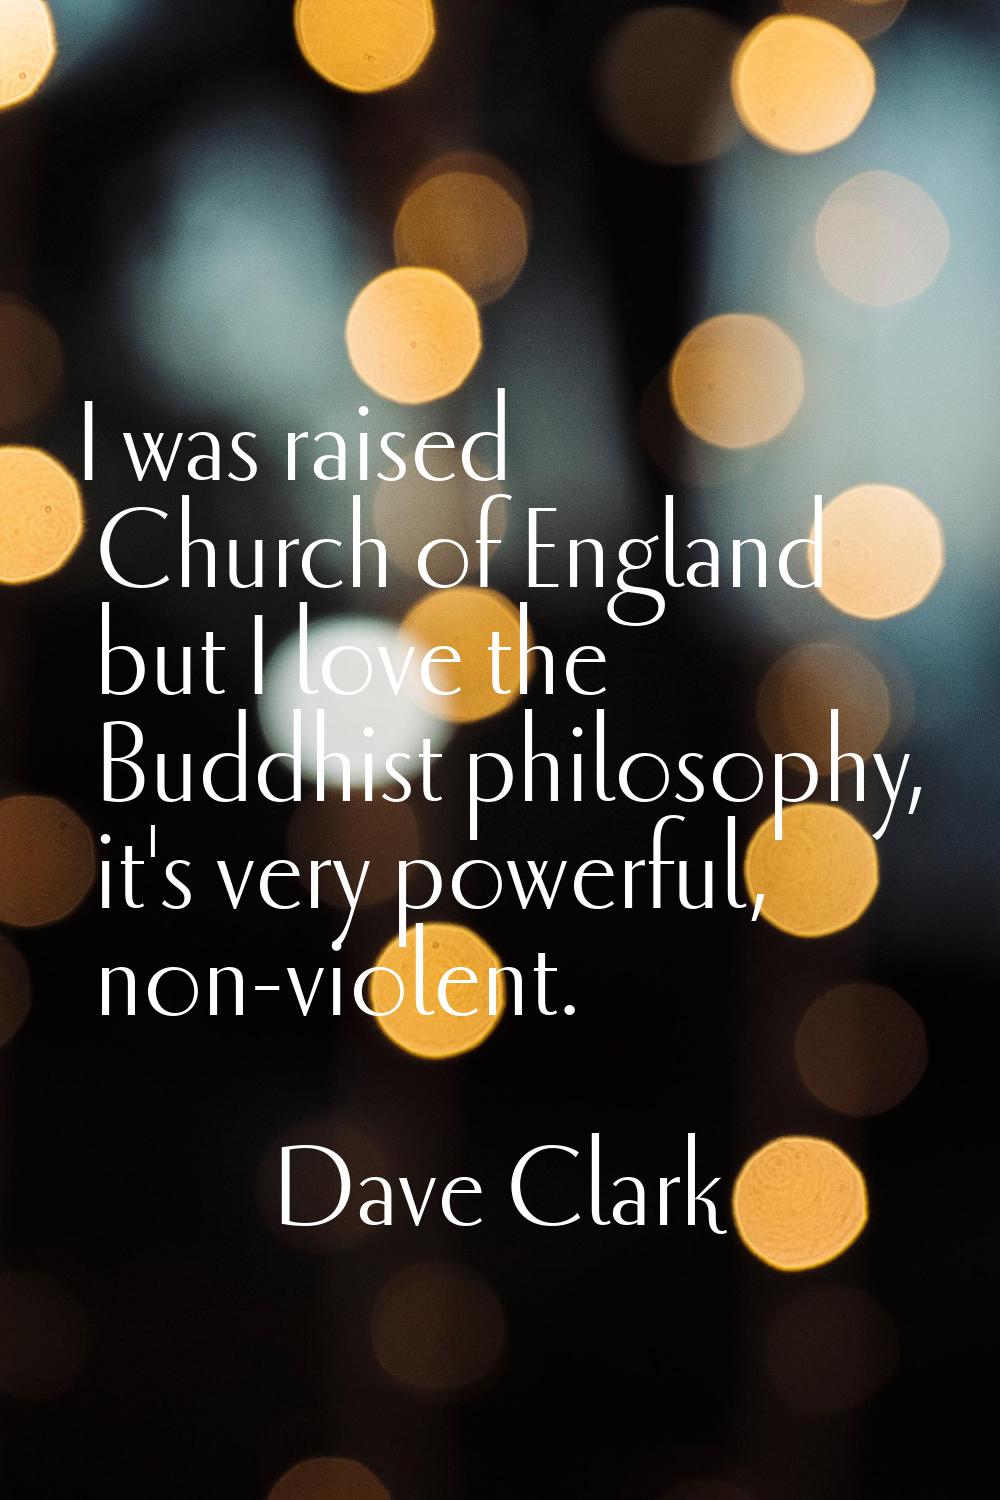 I was raised Church of England but I love the Buddhist philosophy, it's very powerful, non-violent.